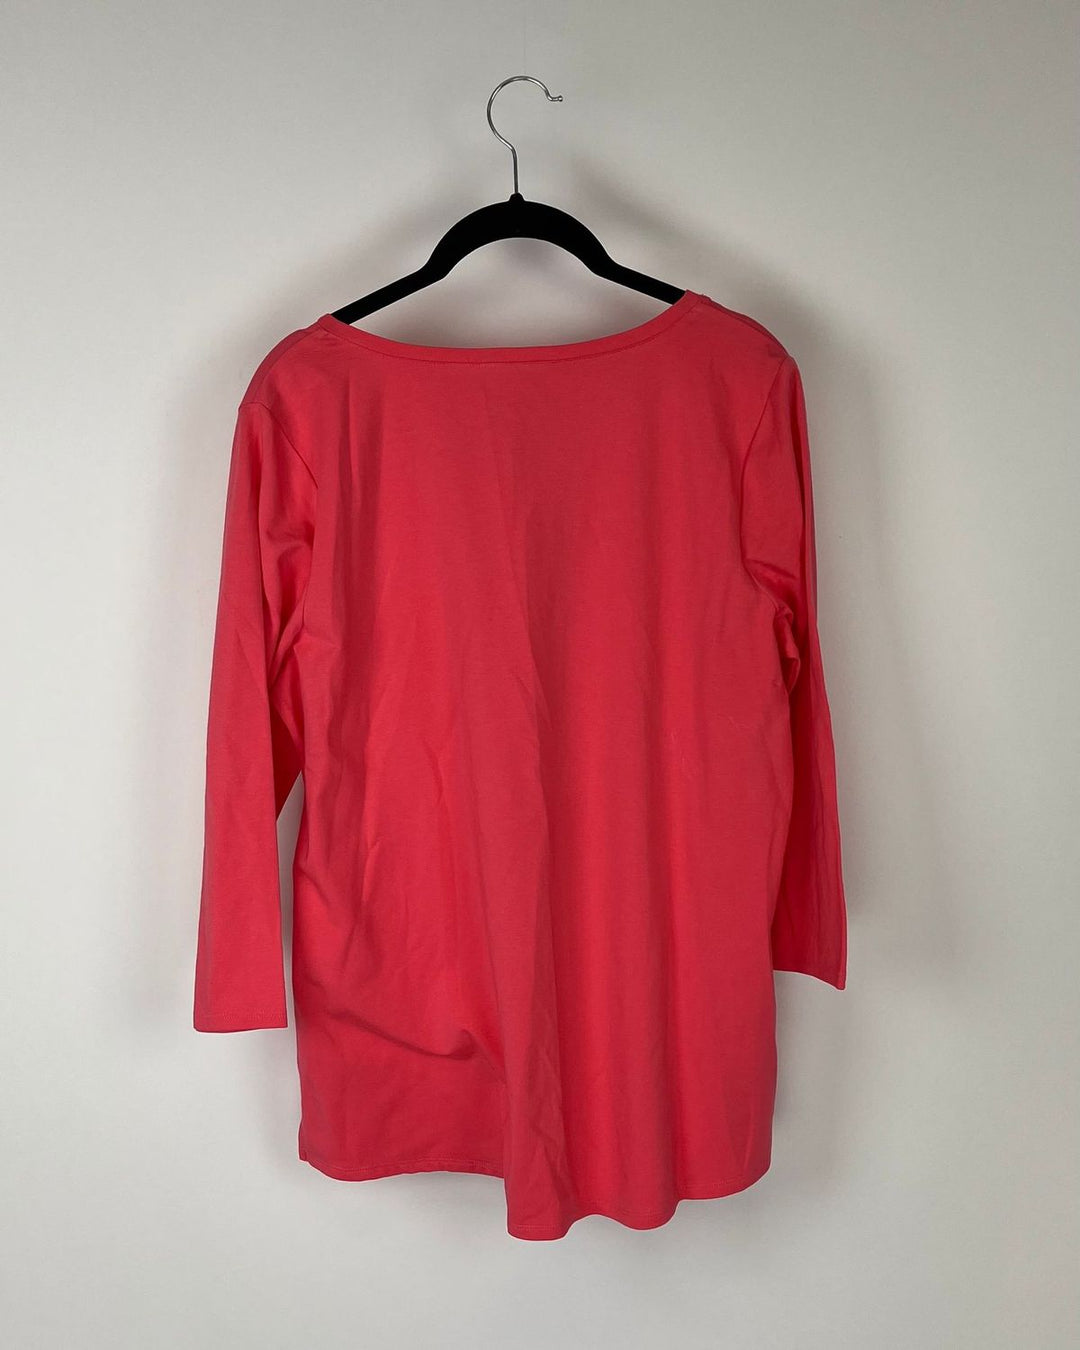 Bright Pink Long Sleeve Top - Size 6-8